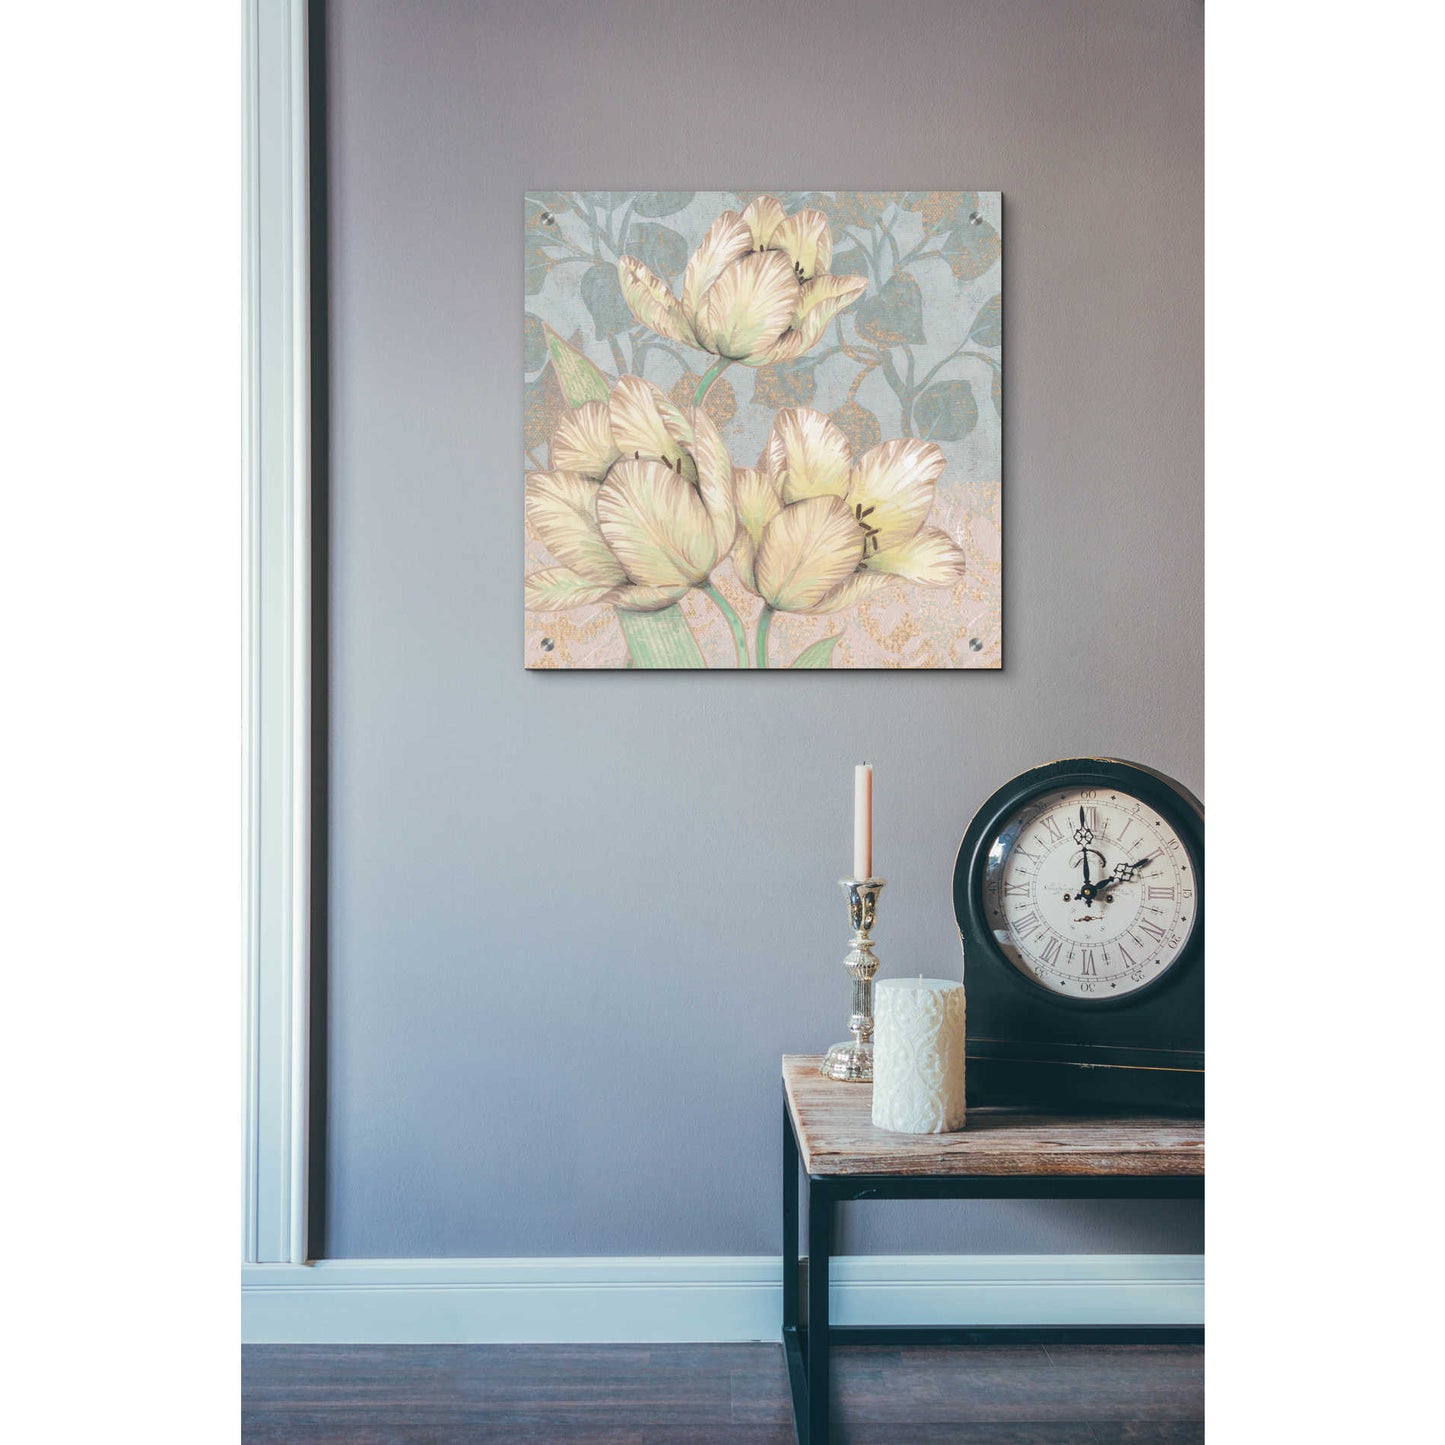 Epic Art 'Trois Fleurs Collection D' by Tim O'Toole, Acrylic Glass Wall Art,24x24